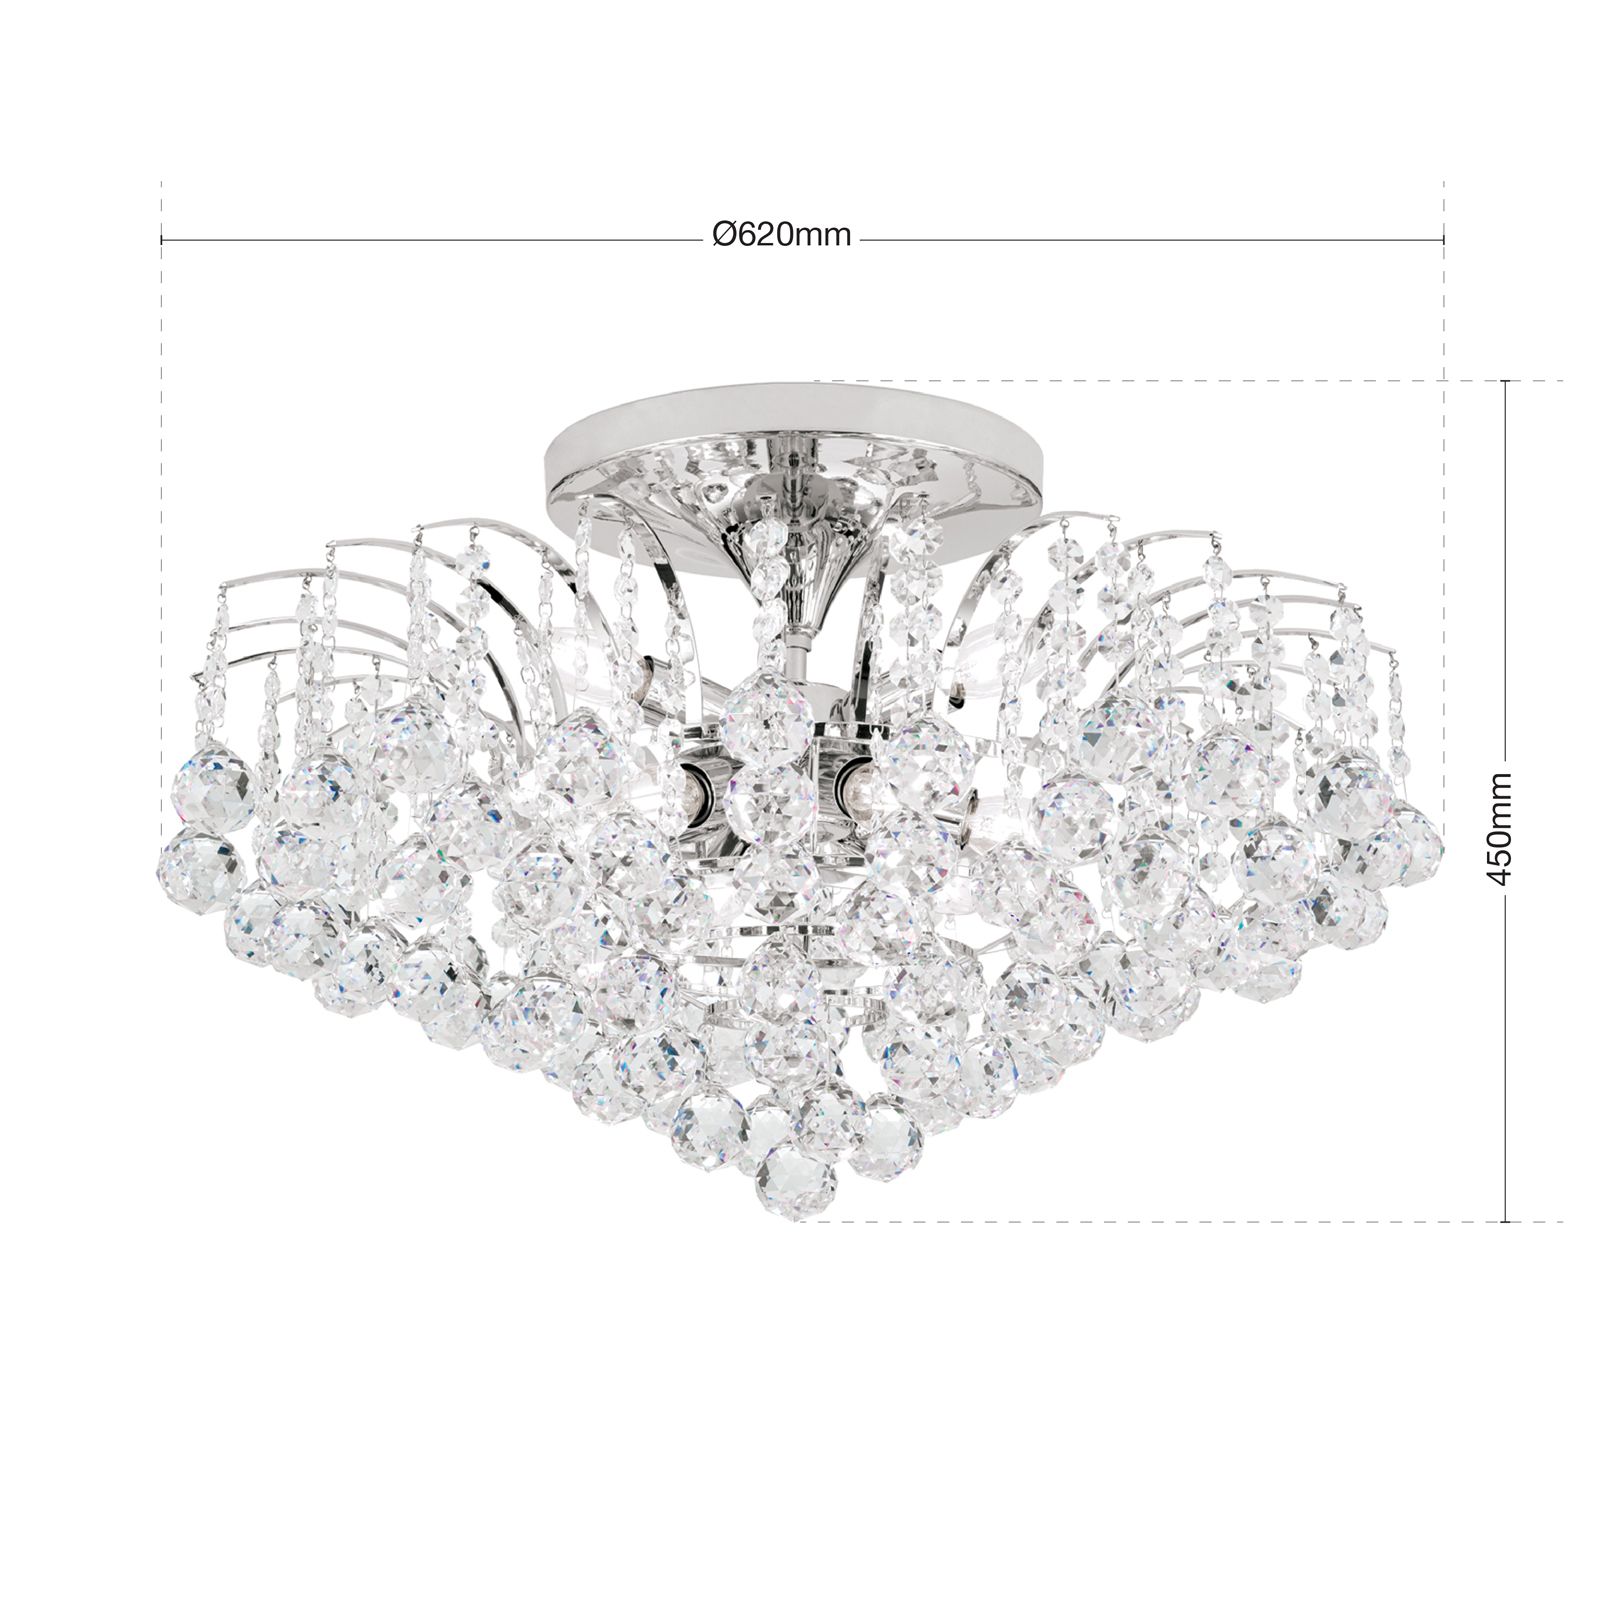 KRISTALL KLASSISCH ceiling light, 9 plated, crystal clear lamps, chrome